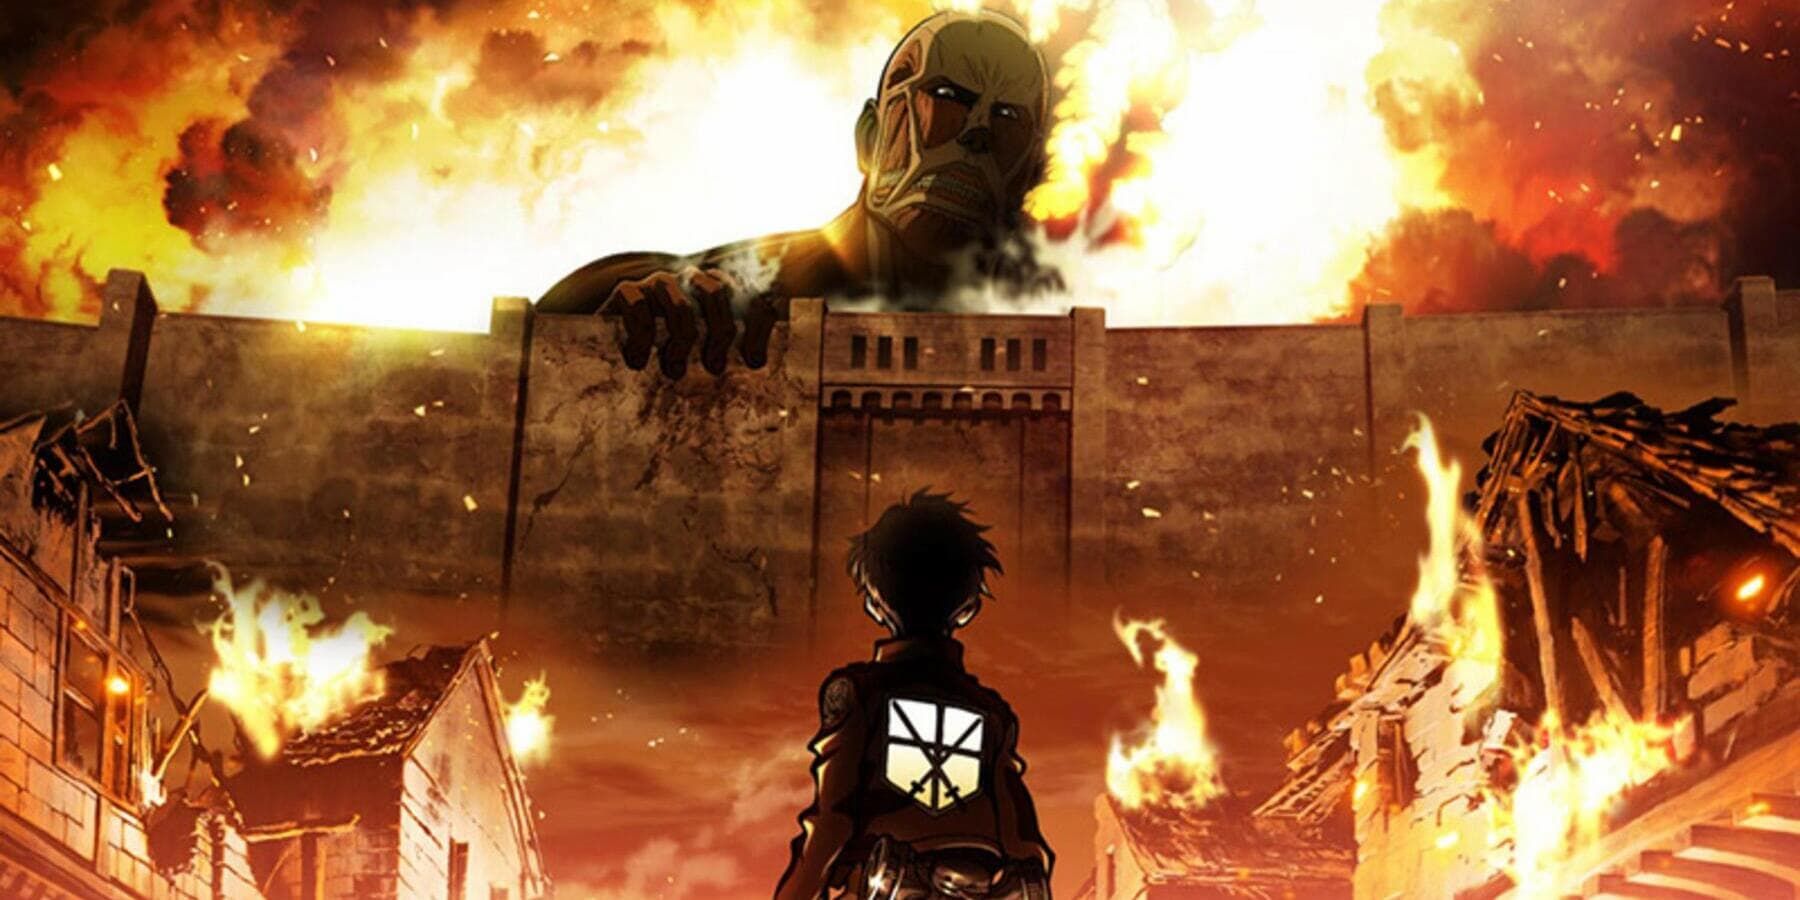 Attack On Titan VR: Unbreakable Announced for Meta Quest
2